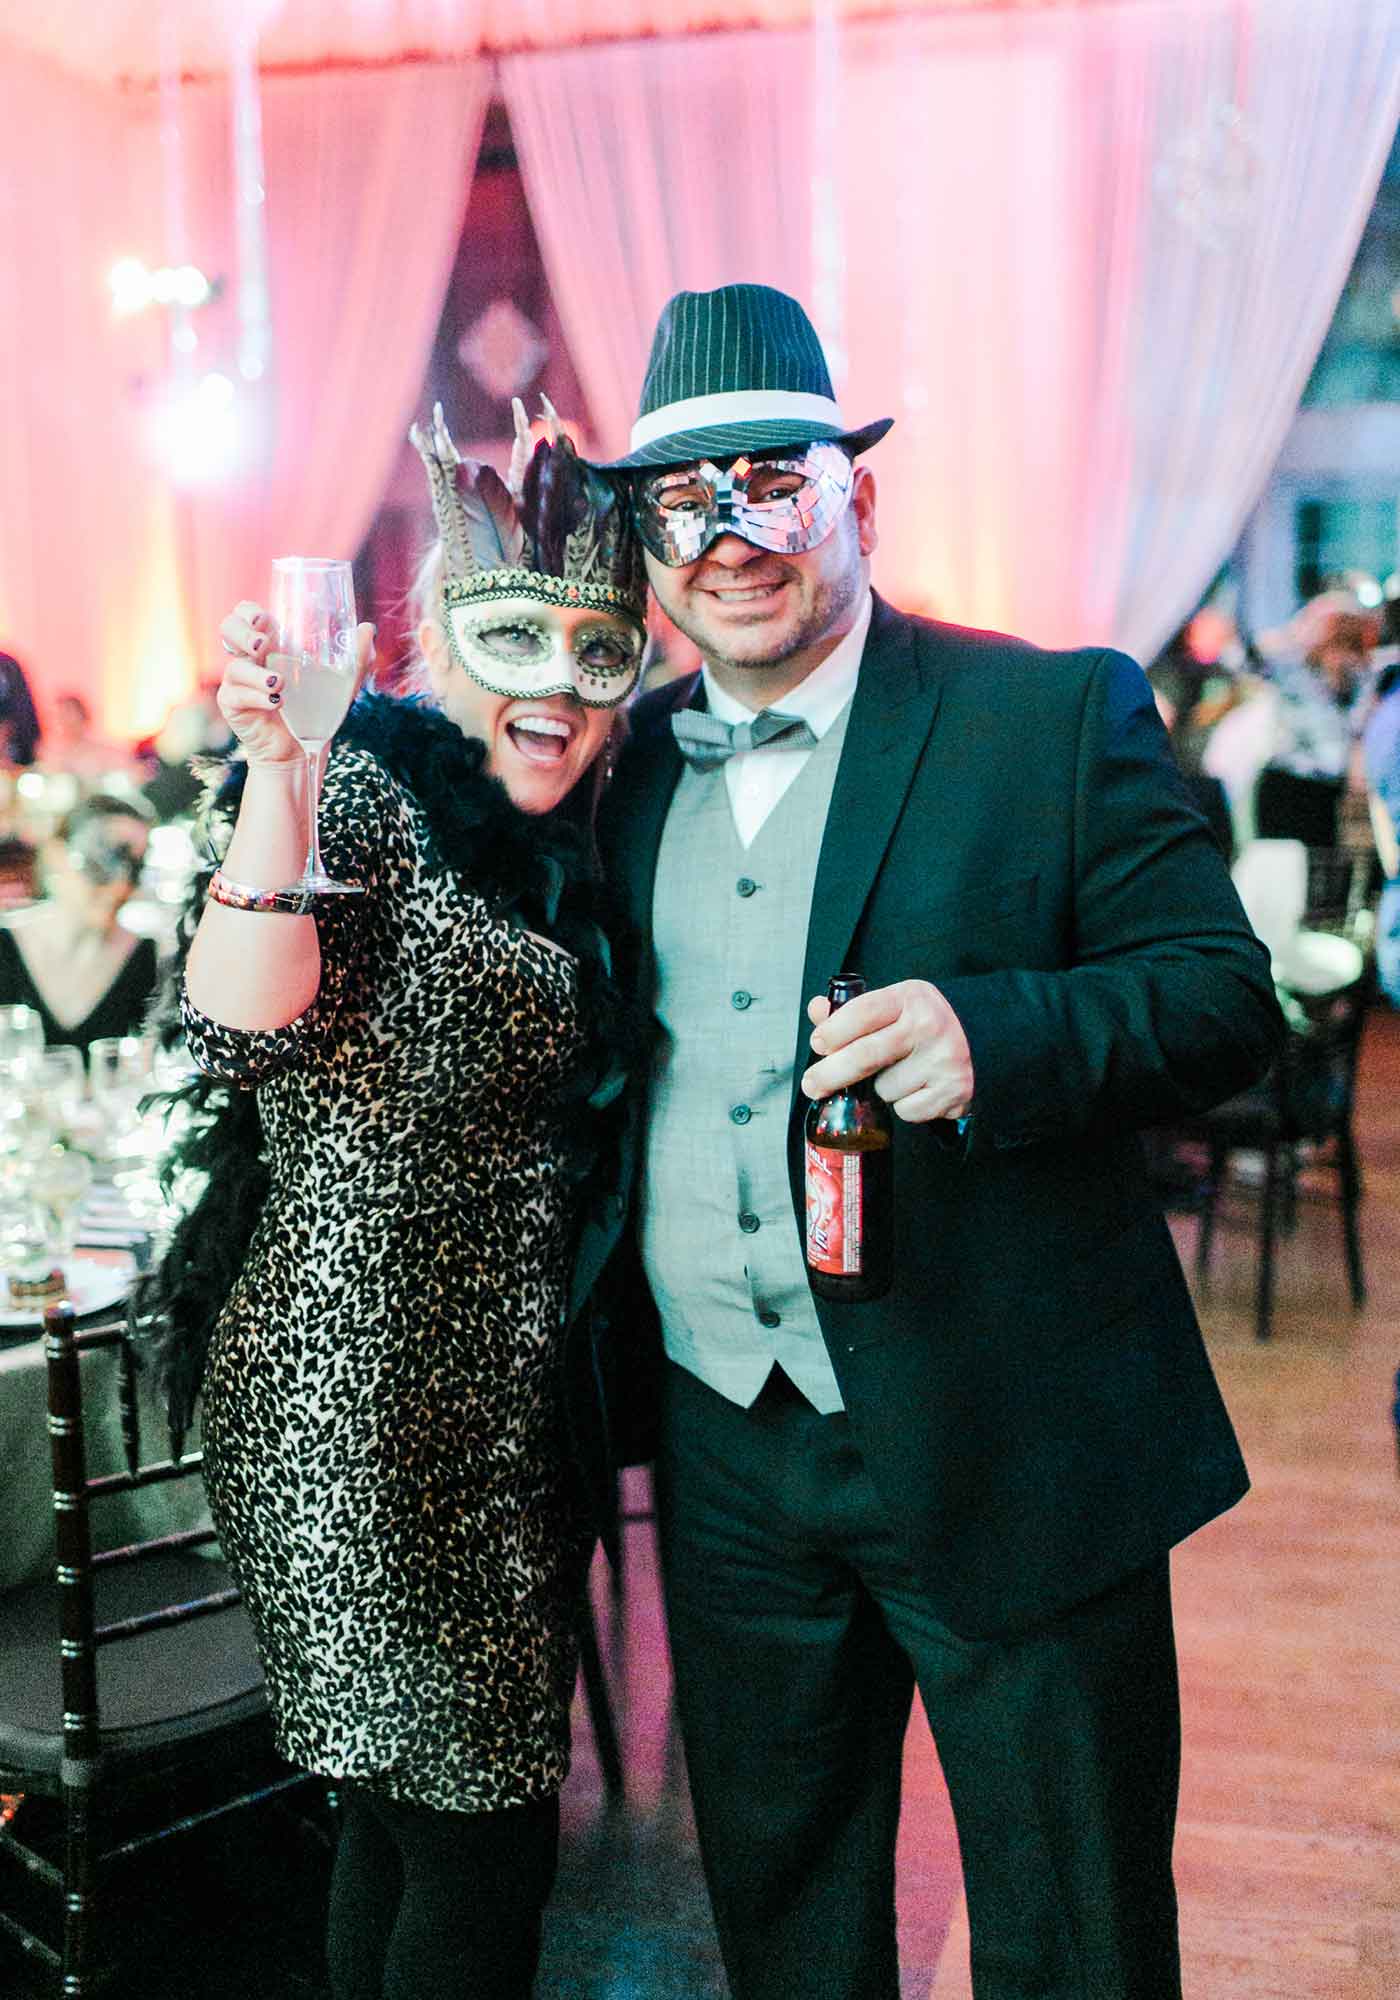 Dance the night away at the New Year's Eve Masked Ball at Veritas Vineyards in Virginia